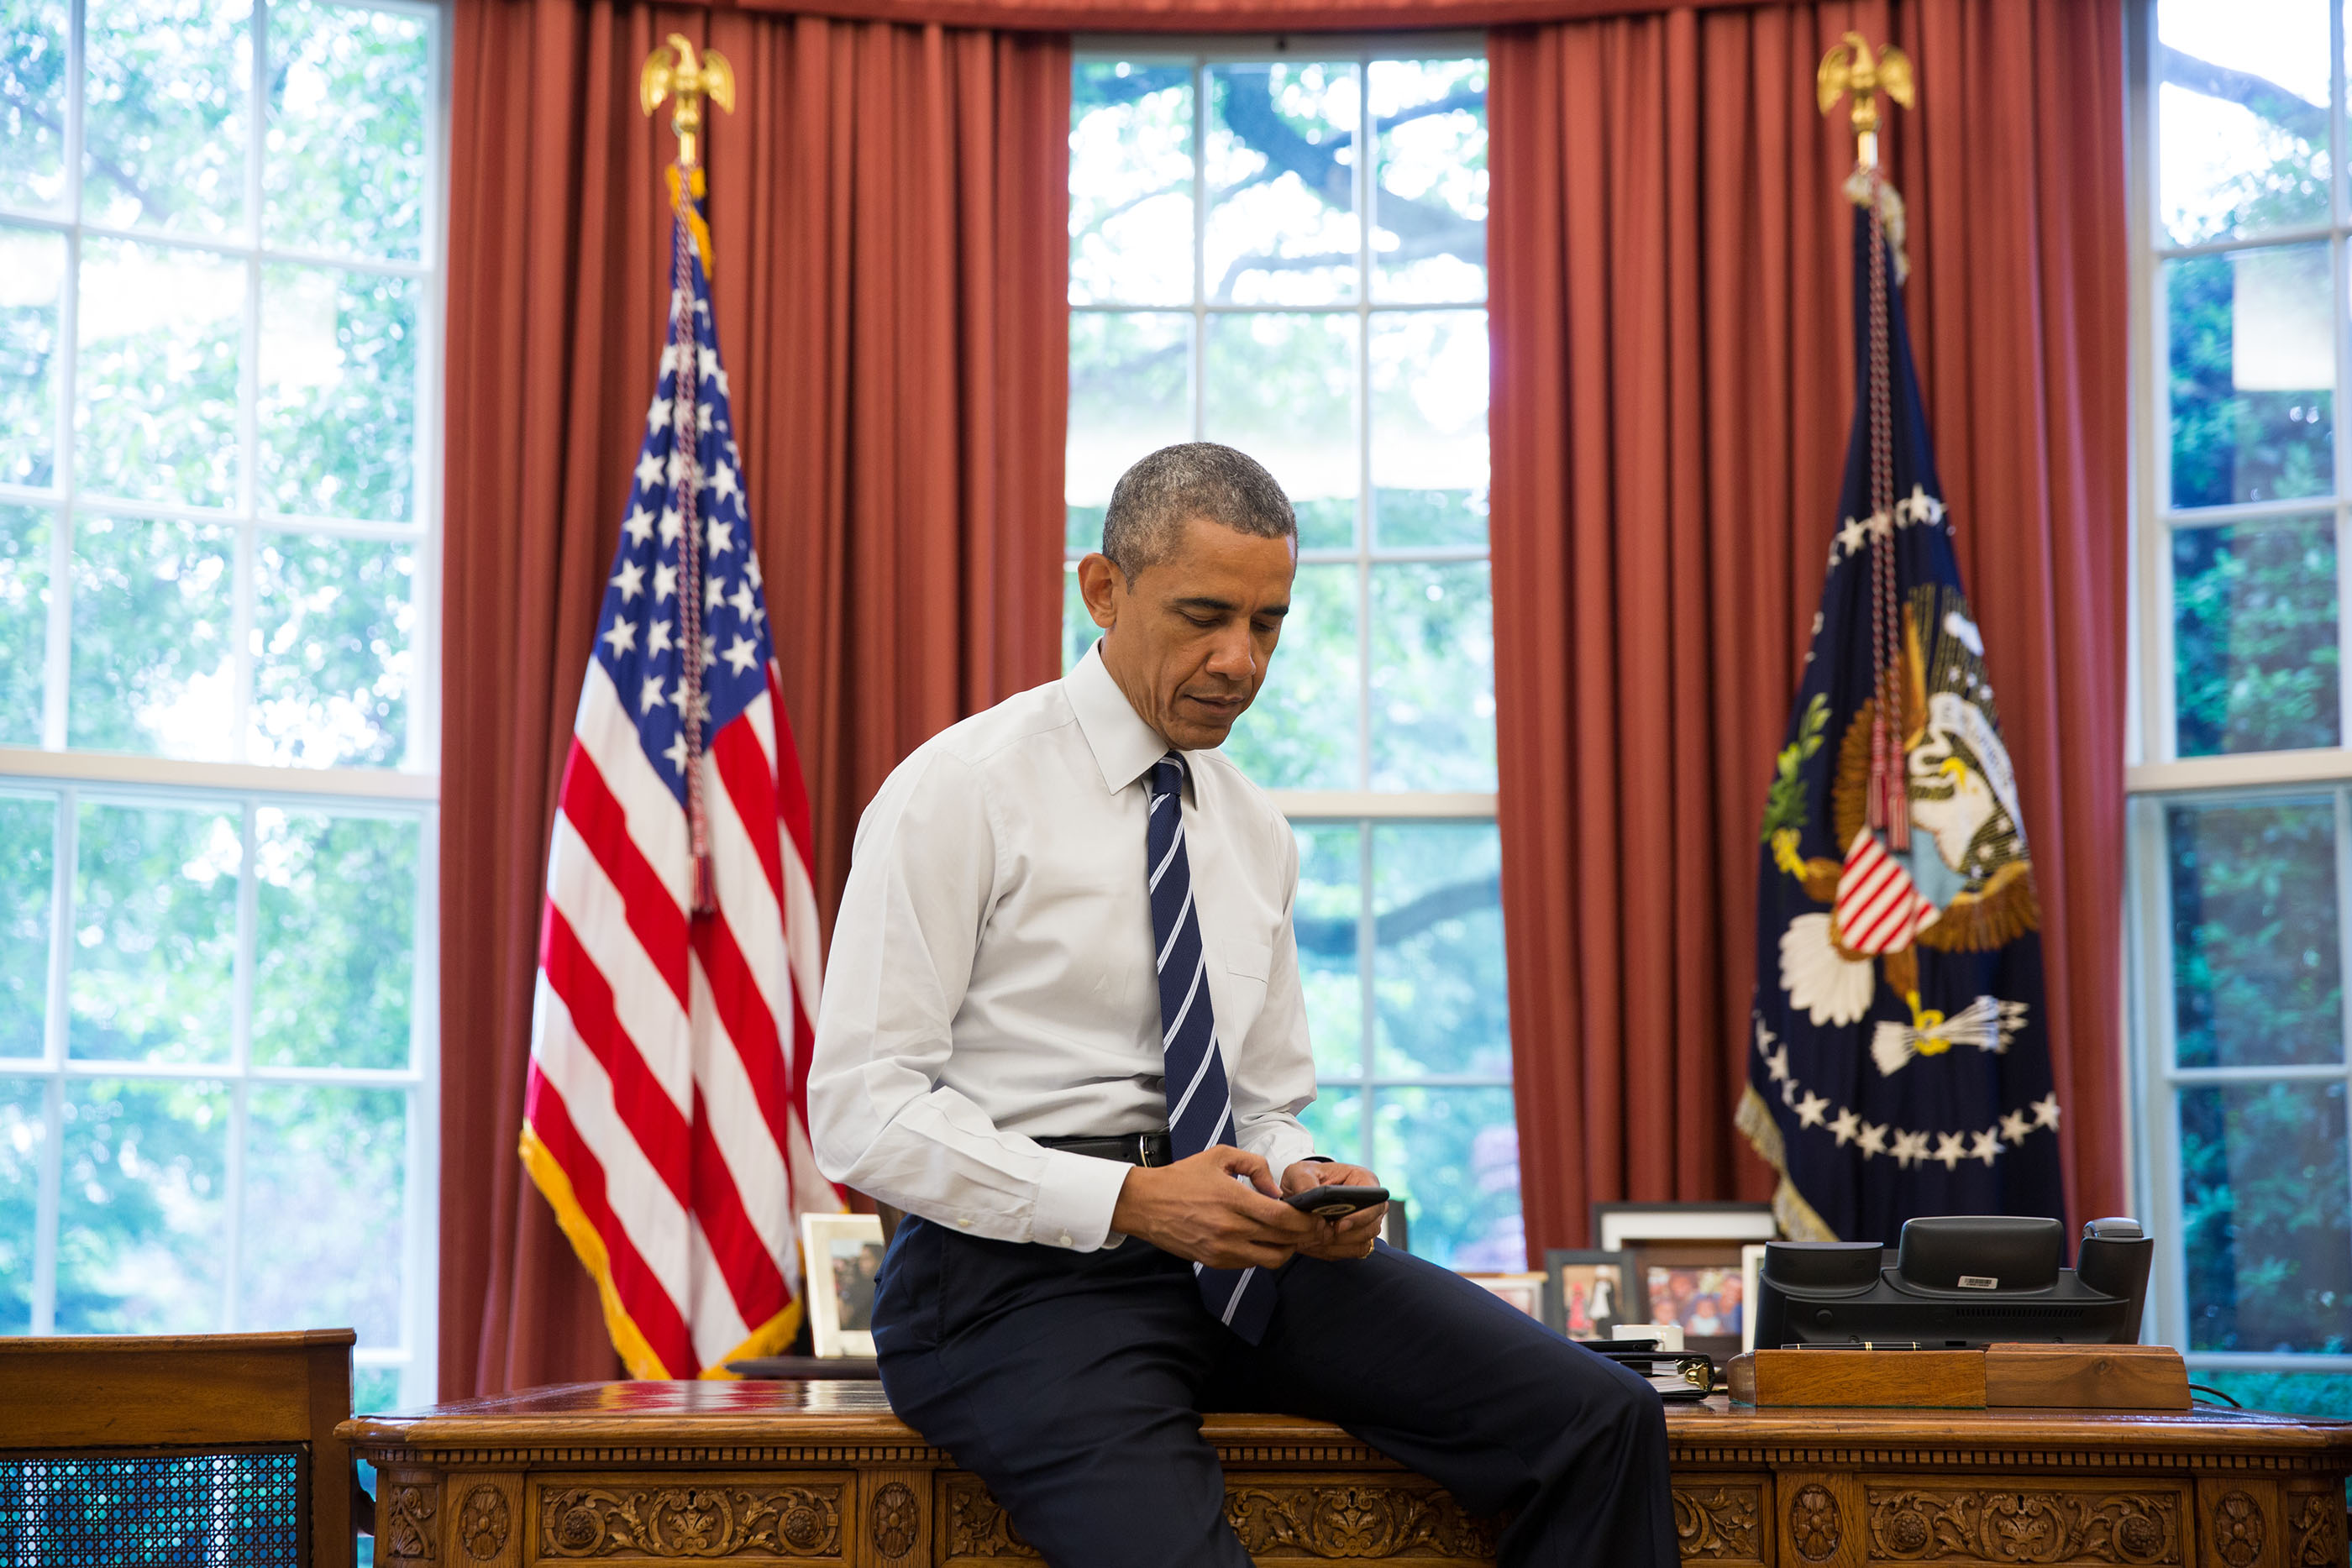 President Barack Obama tweets his first tweet from his new @POTUS account from the Oval Office